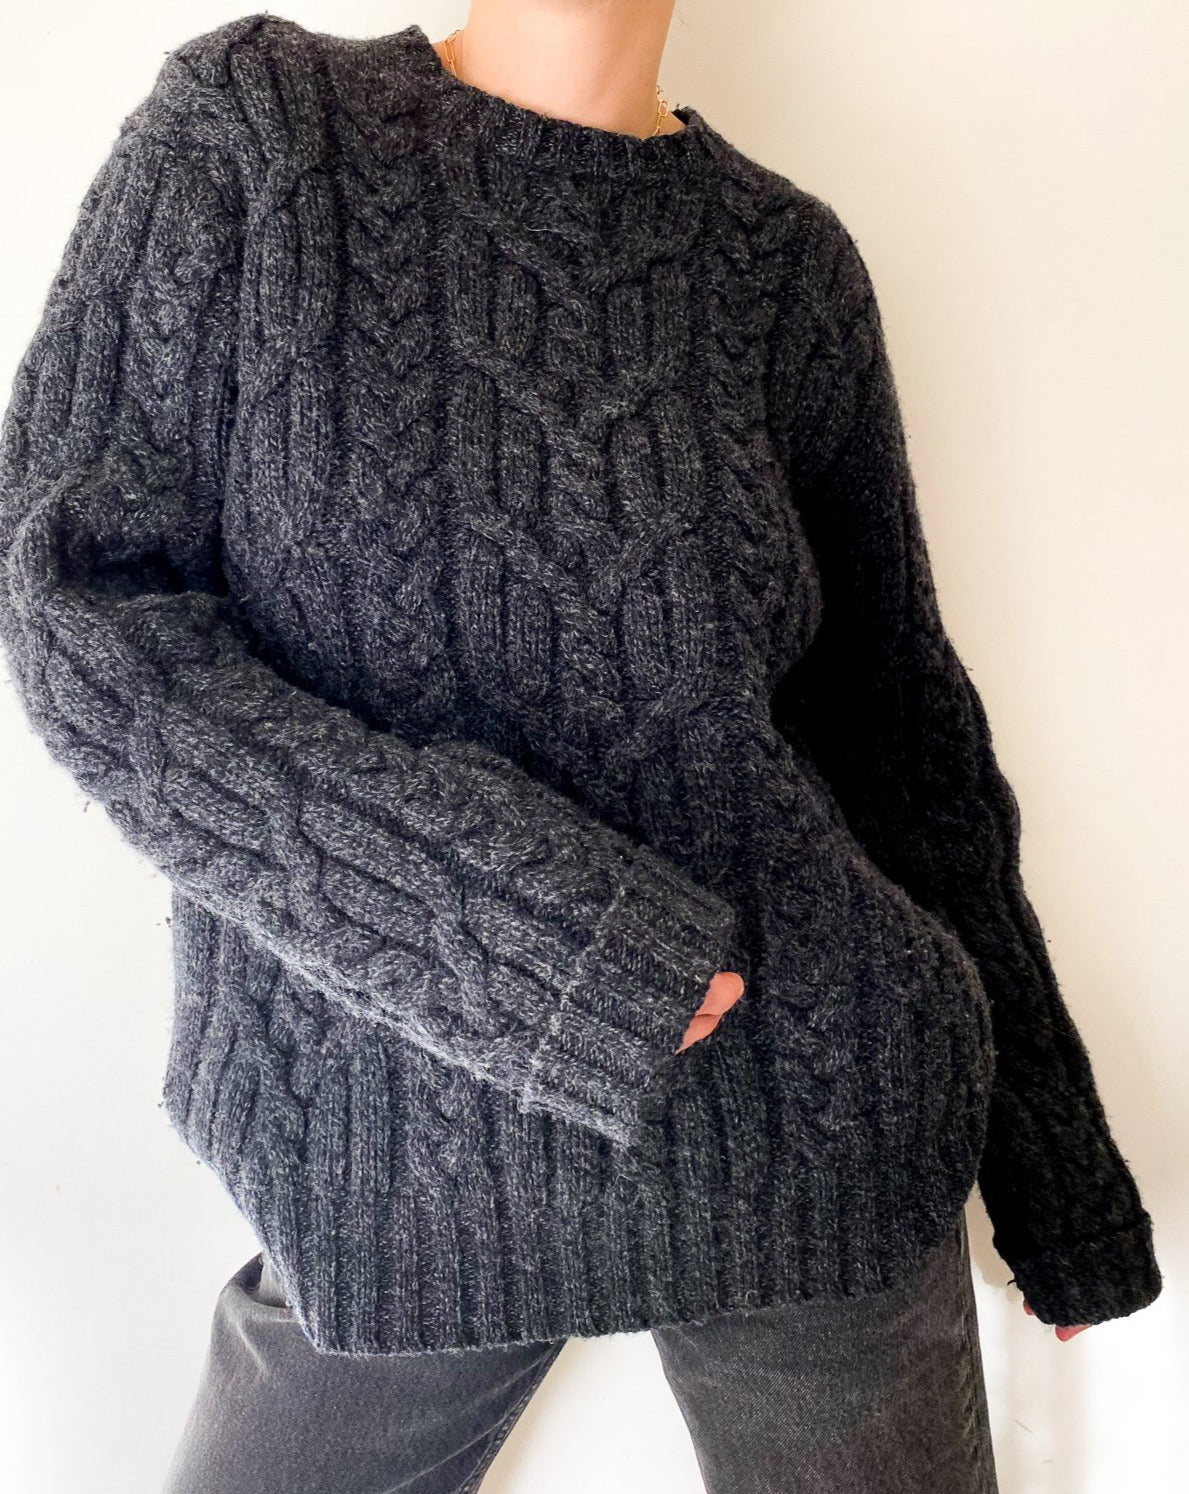 Vintage Charcoal Cable-Knit Sweater